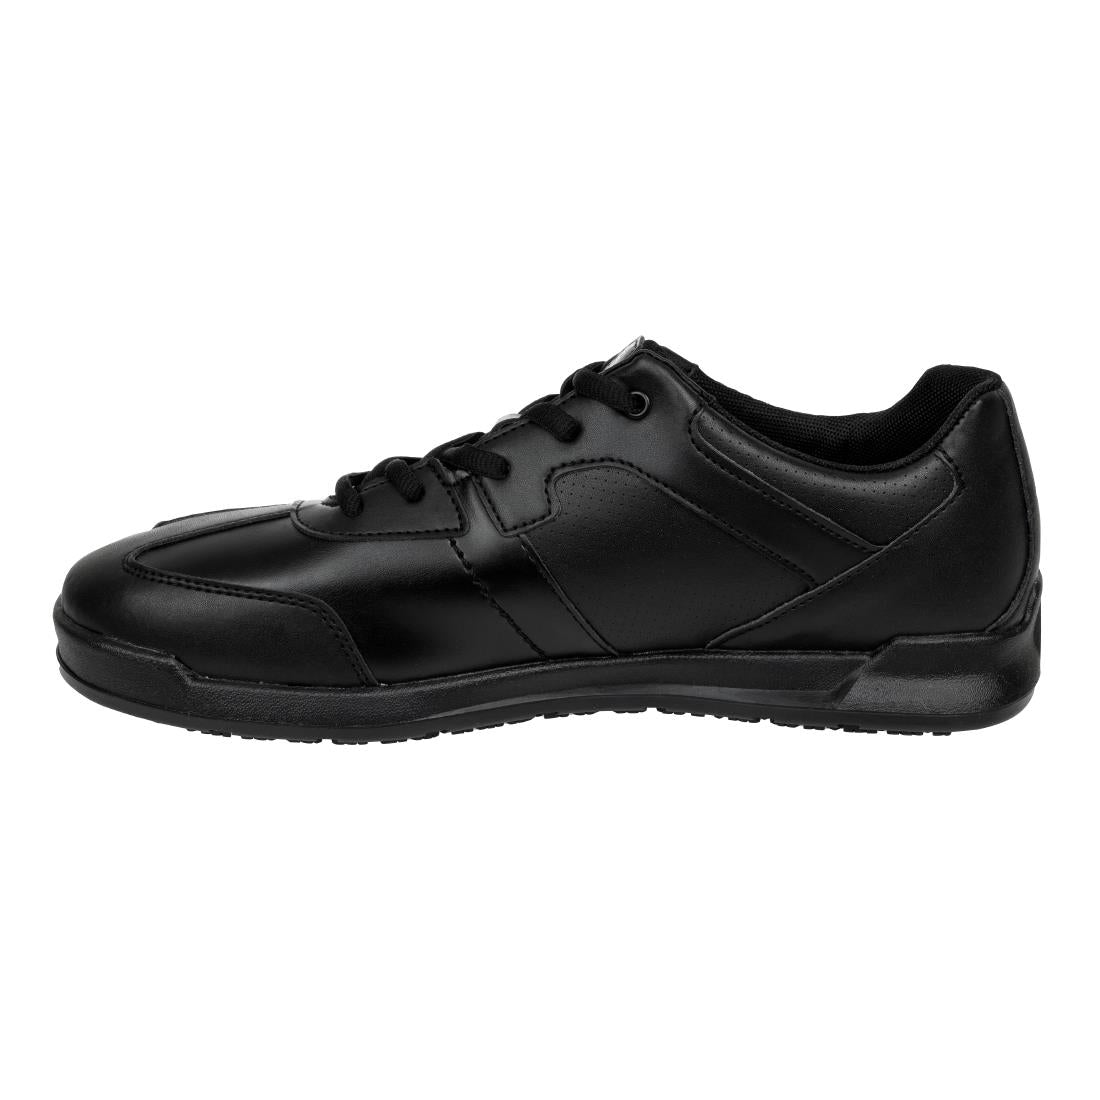 BB585-47 Shoes for Crews Freestyle Trainers Black Size 47 JD Catering Equipment Solutions Ltd